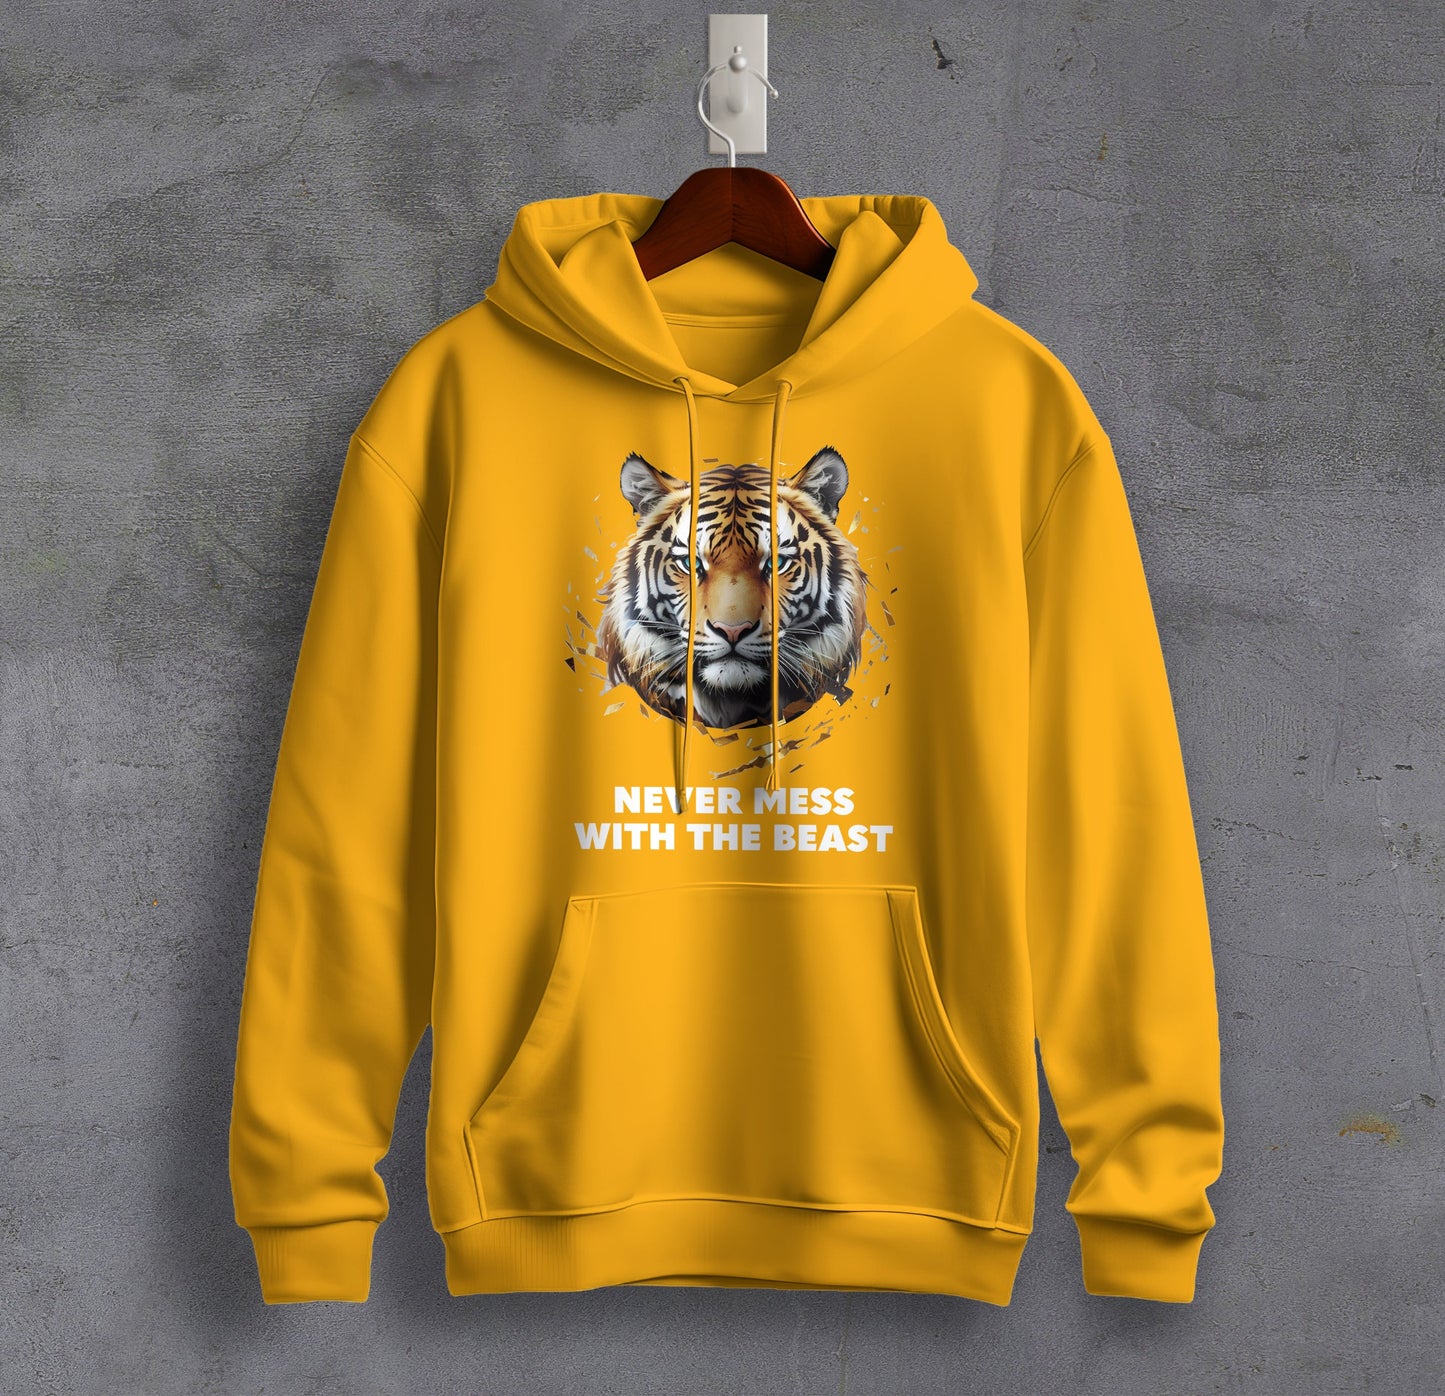 Never Mess with the Beast - Tiger Graphic Printed Hooded Sweat Shirt for Men - Cotton - Magnificence of India Sweat Shirt